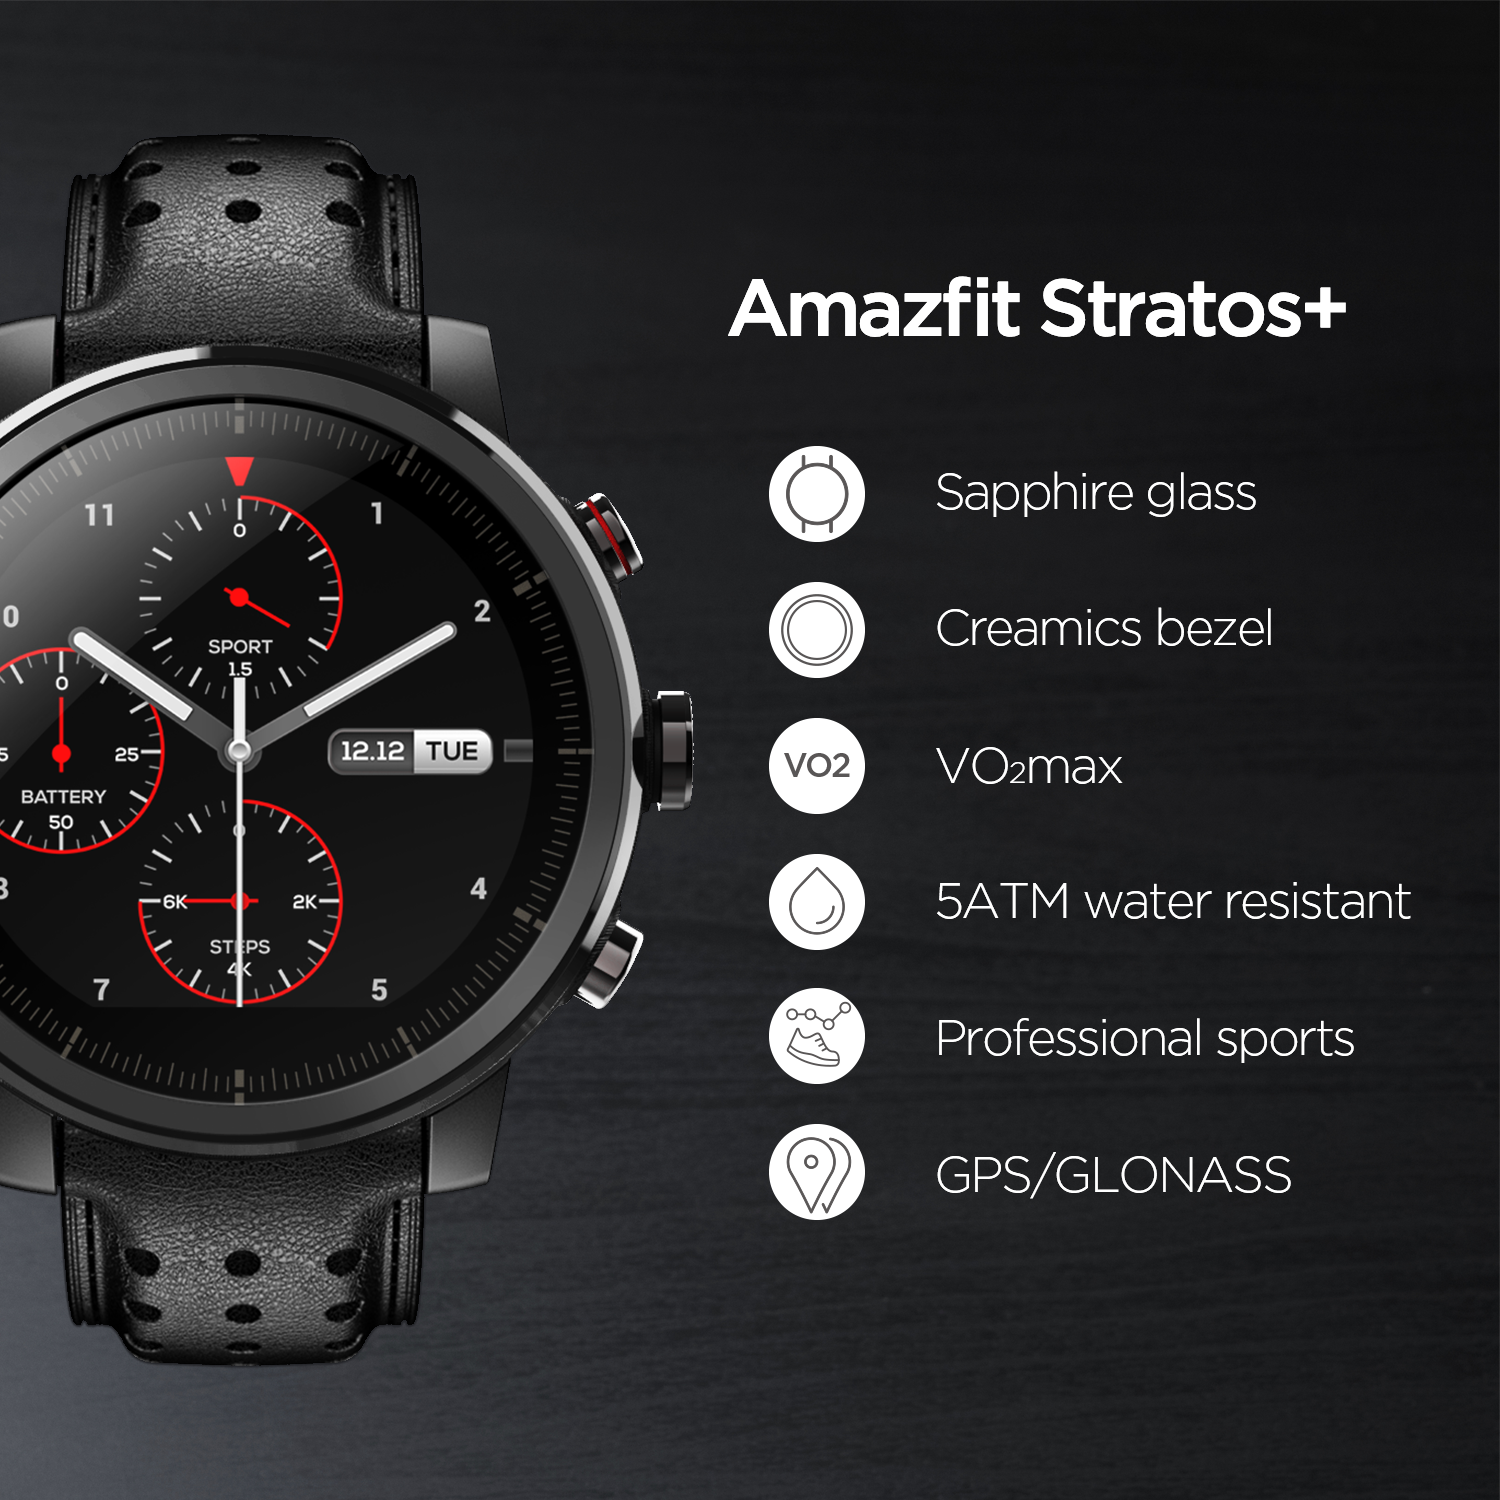 In Stock Amazfit Stratos+ Flagship Smart Watch Genuine Leather Strap Sapphire Glass Flourorubber Strap for Android Phone